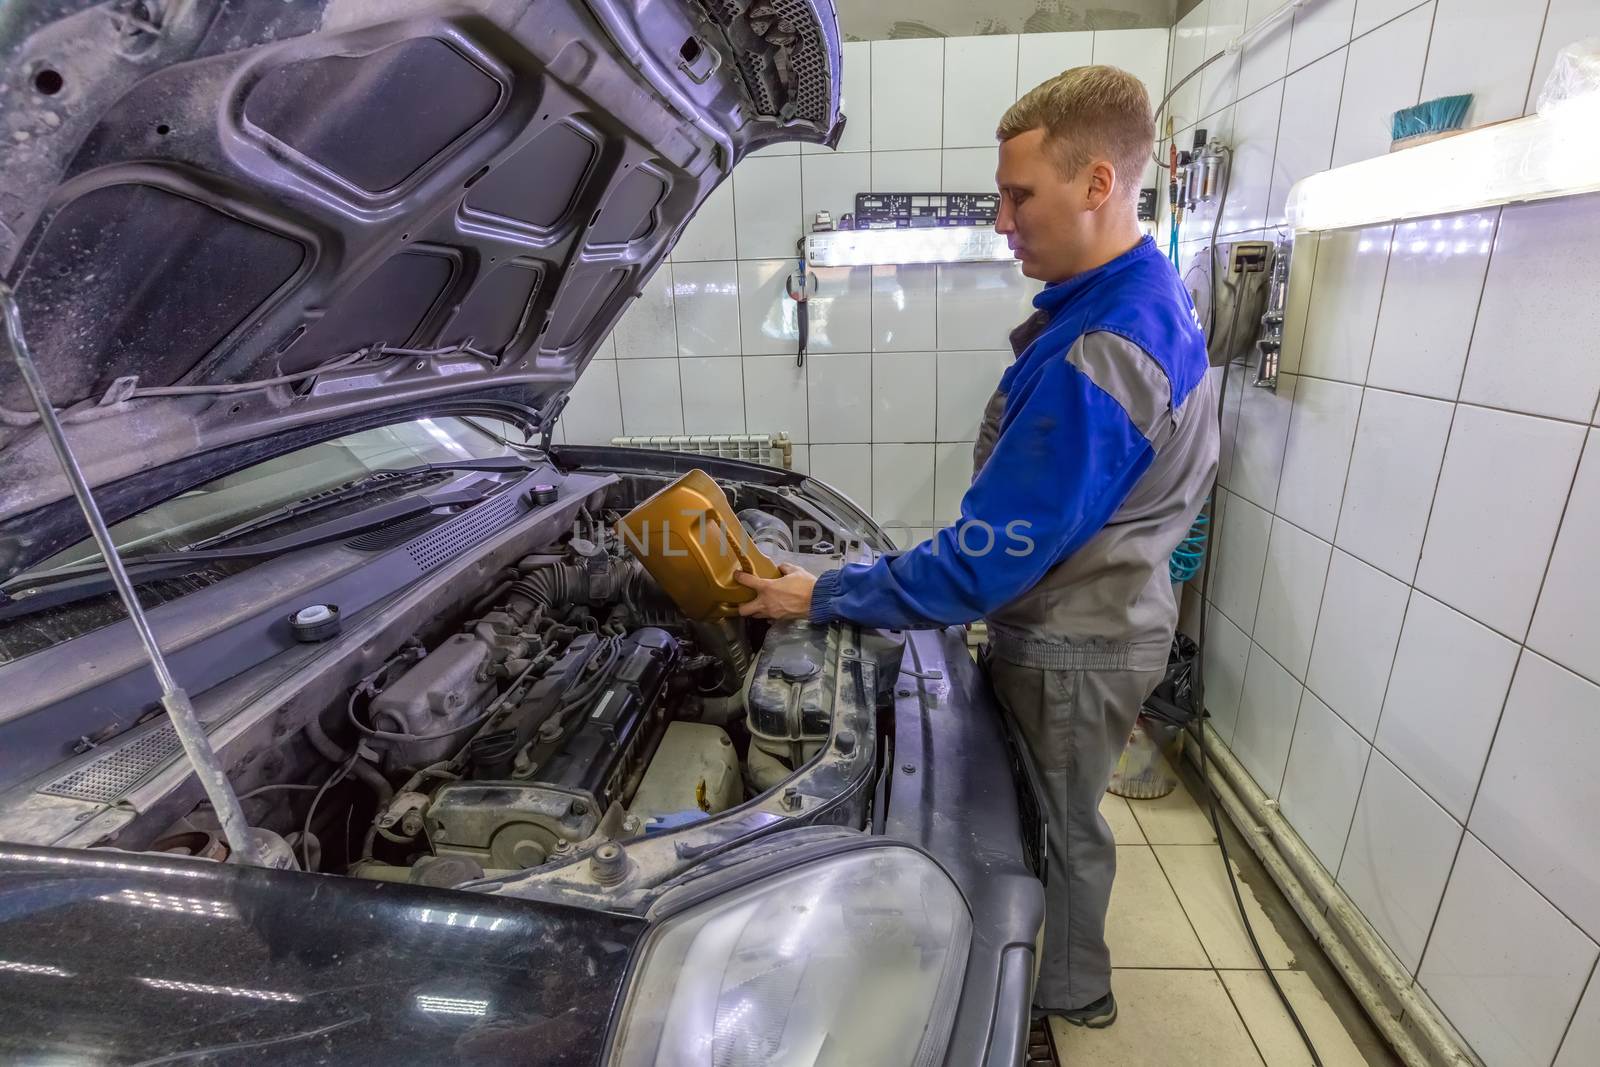 Car mechanic replacing and pouring oil into engine at car service station during regular check-up routine by DamantisZ